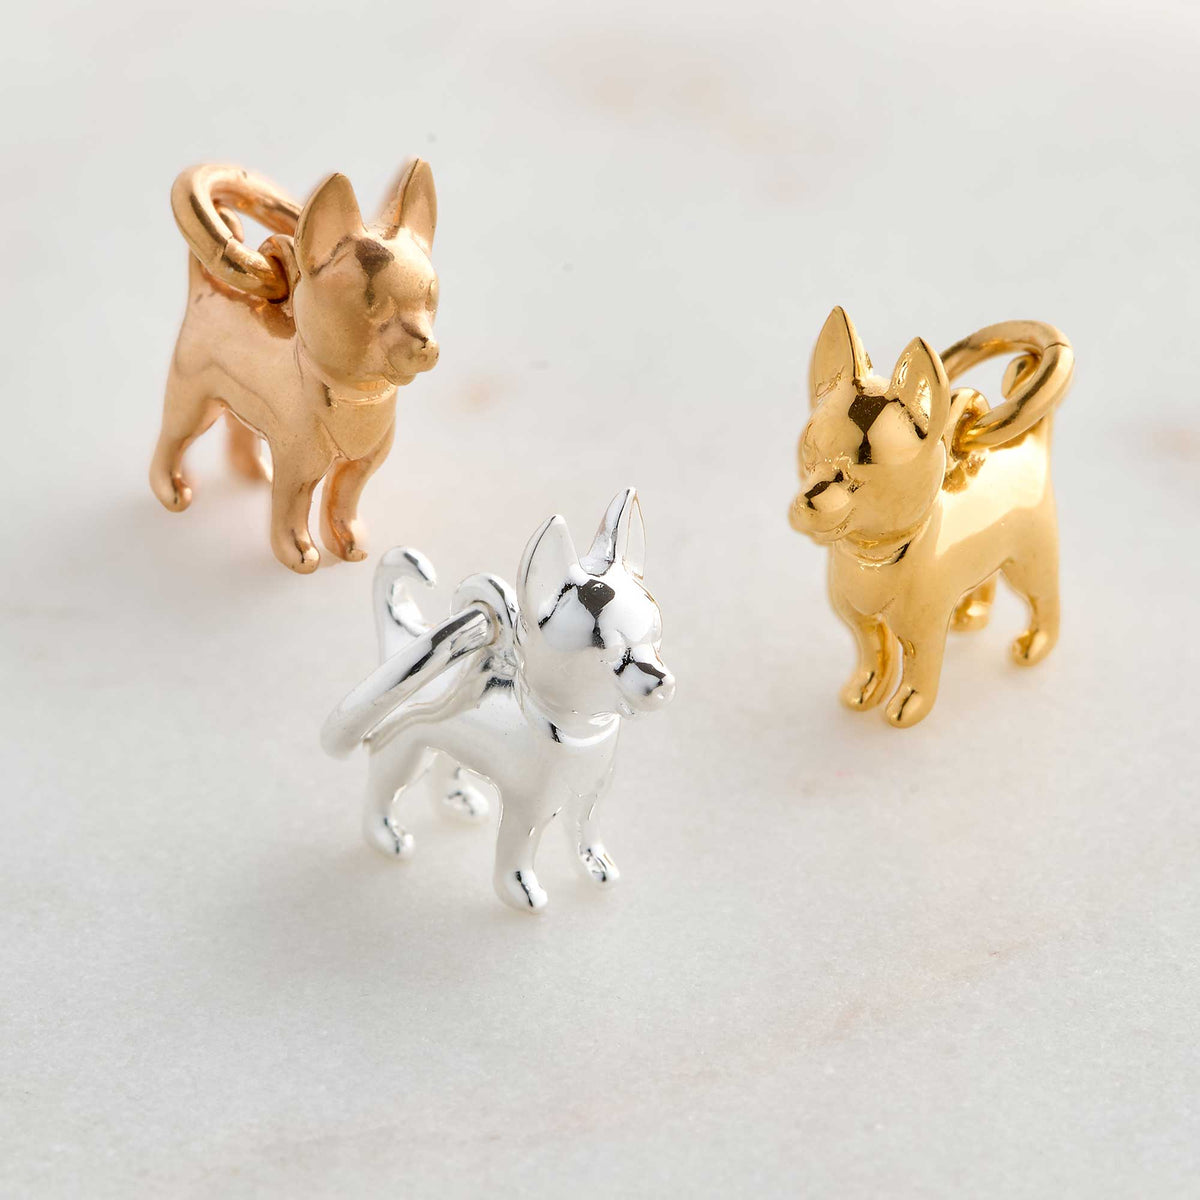 silver gold rose gold chihuahua dog charms scarlett jewellery brighton hove